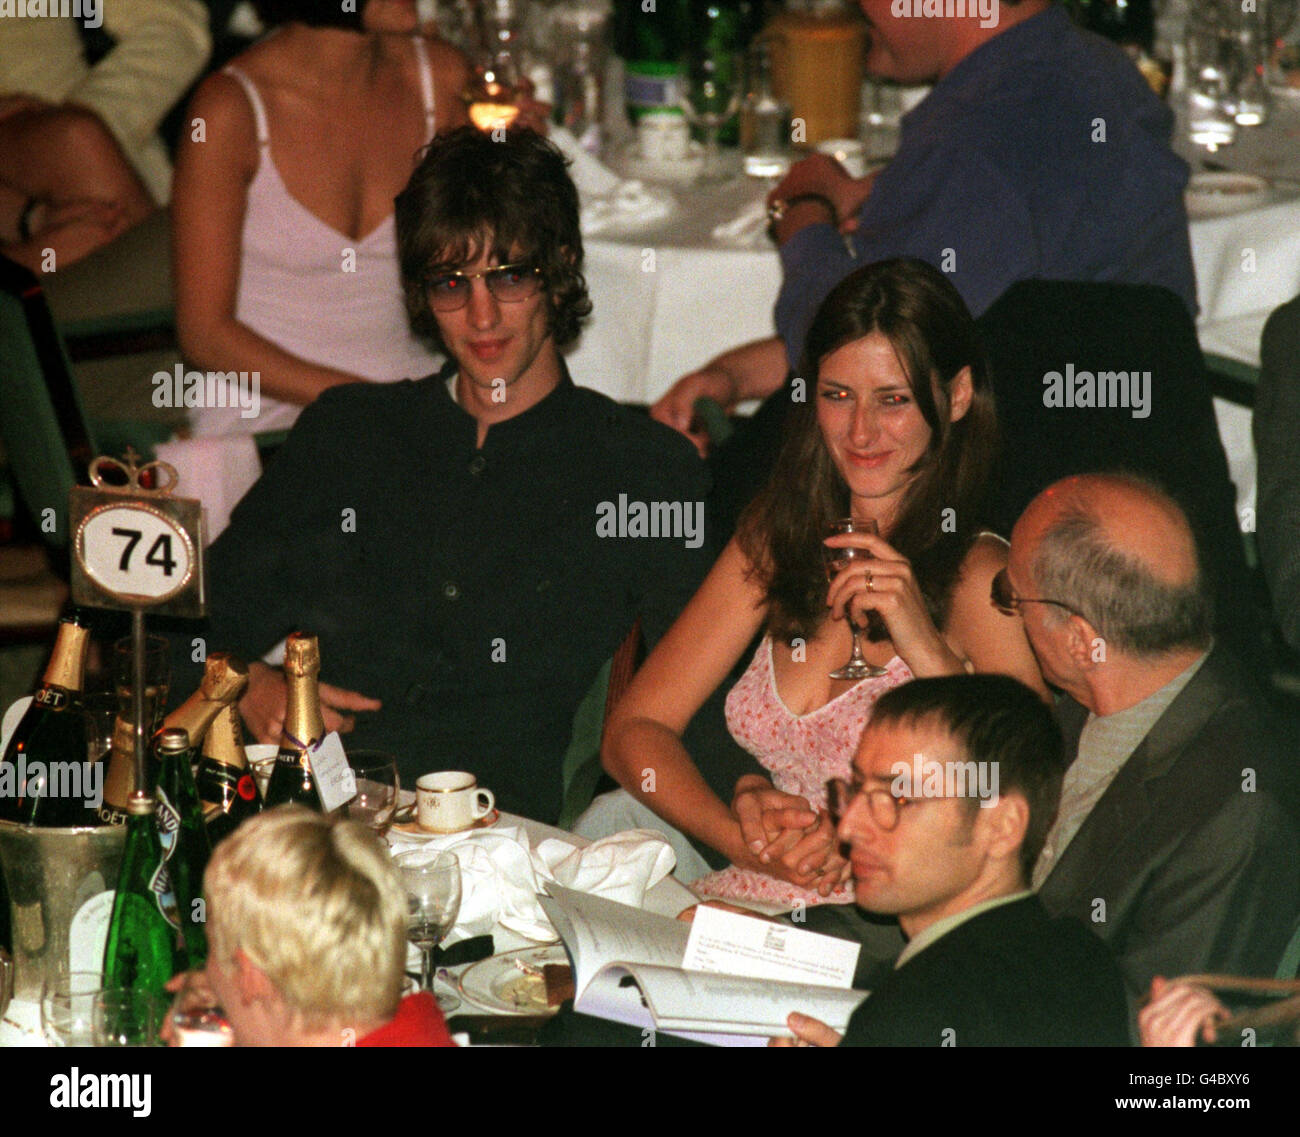 PA NEWS PHOTO 28/5/98 RICHARD ASHCROFT, LEAD SINGER OF THE VERVE AND HIS  WIFE